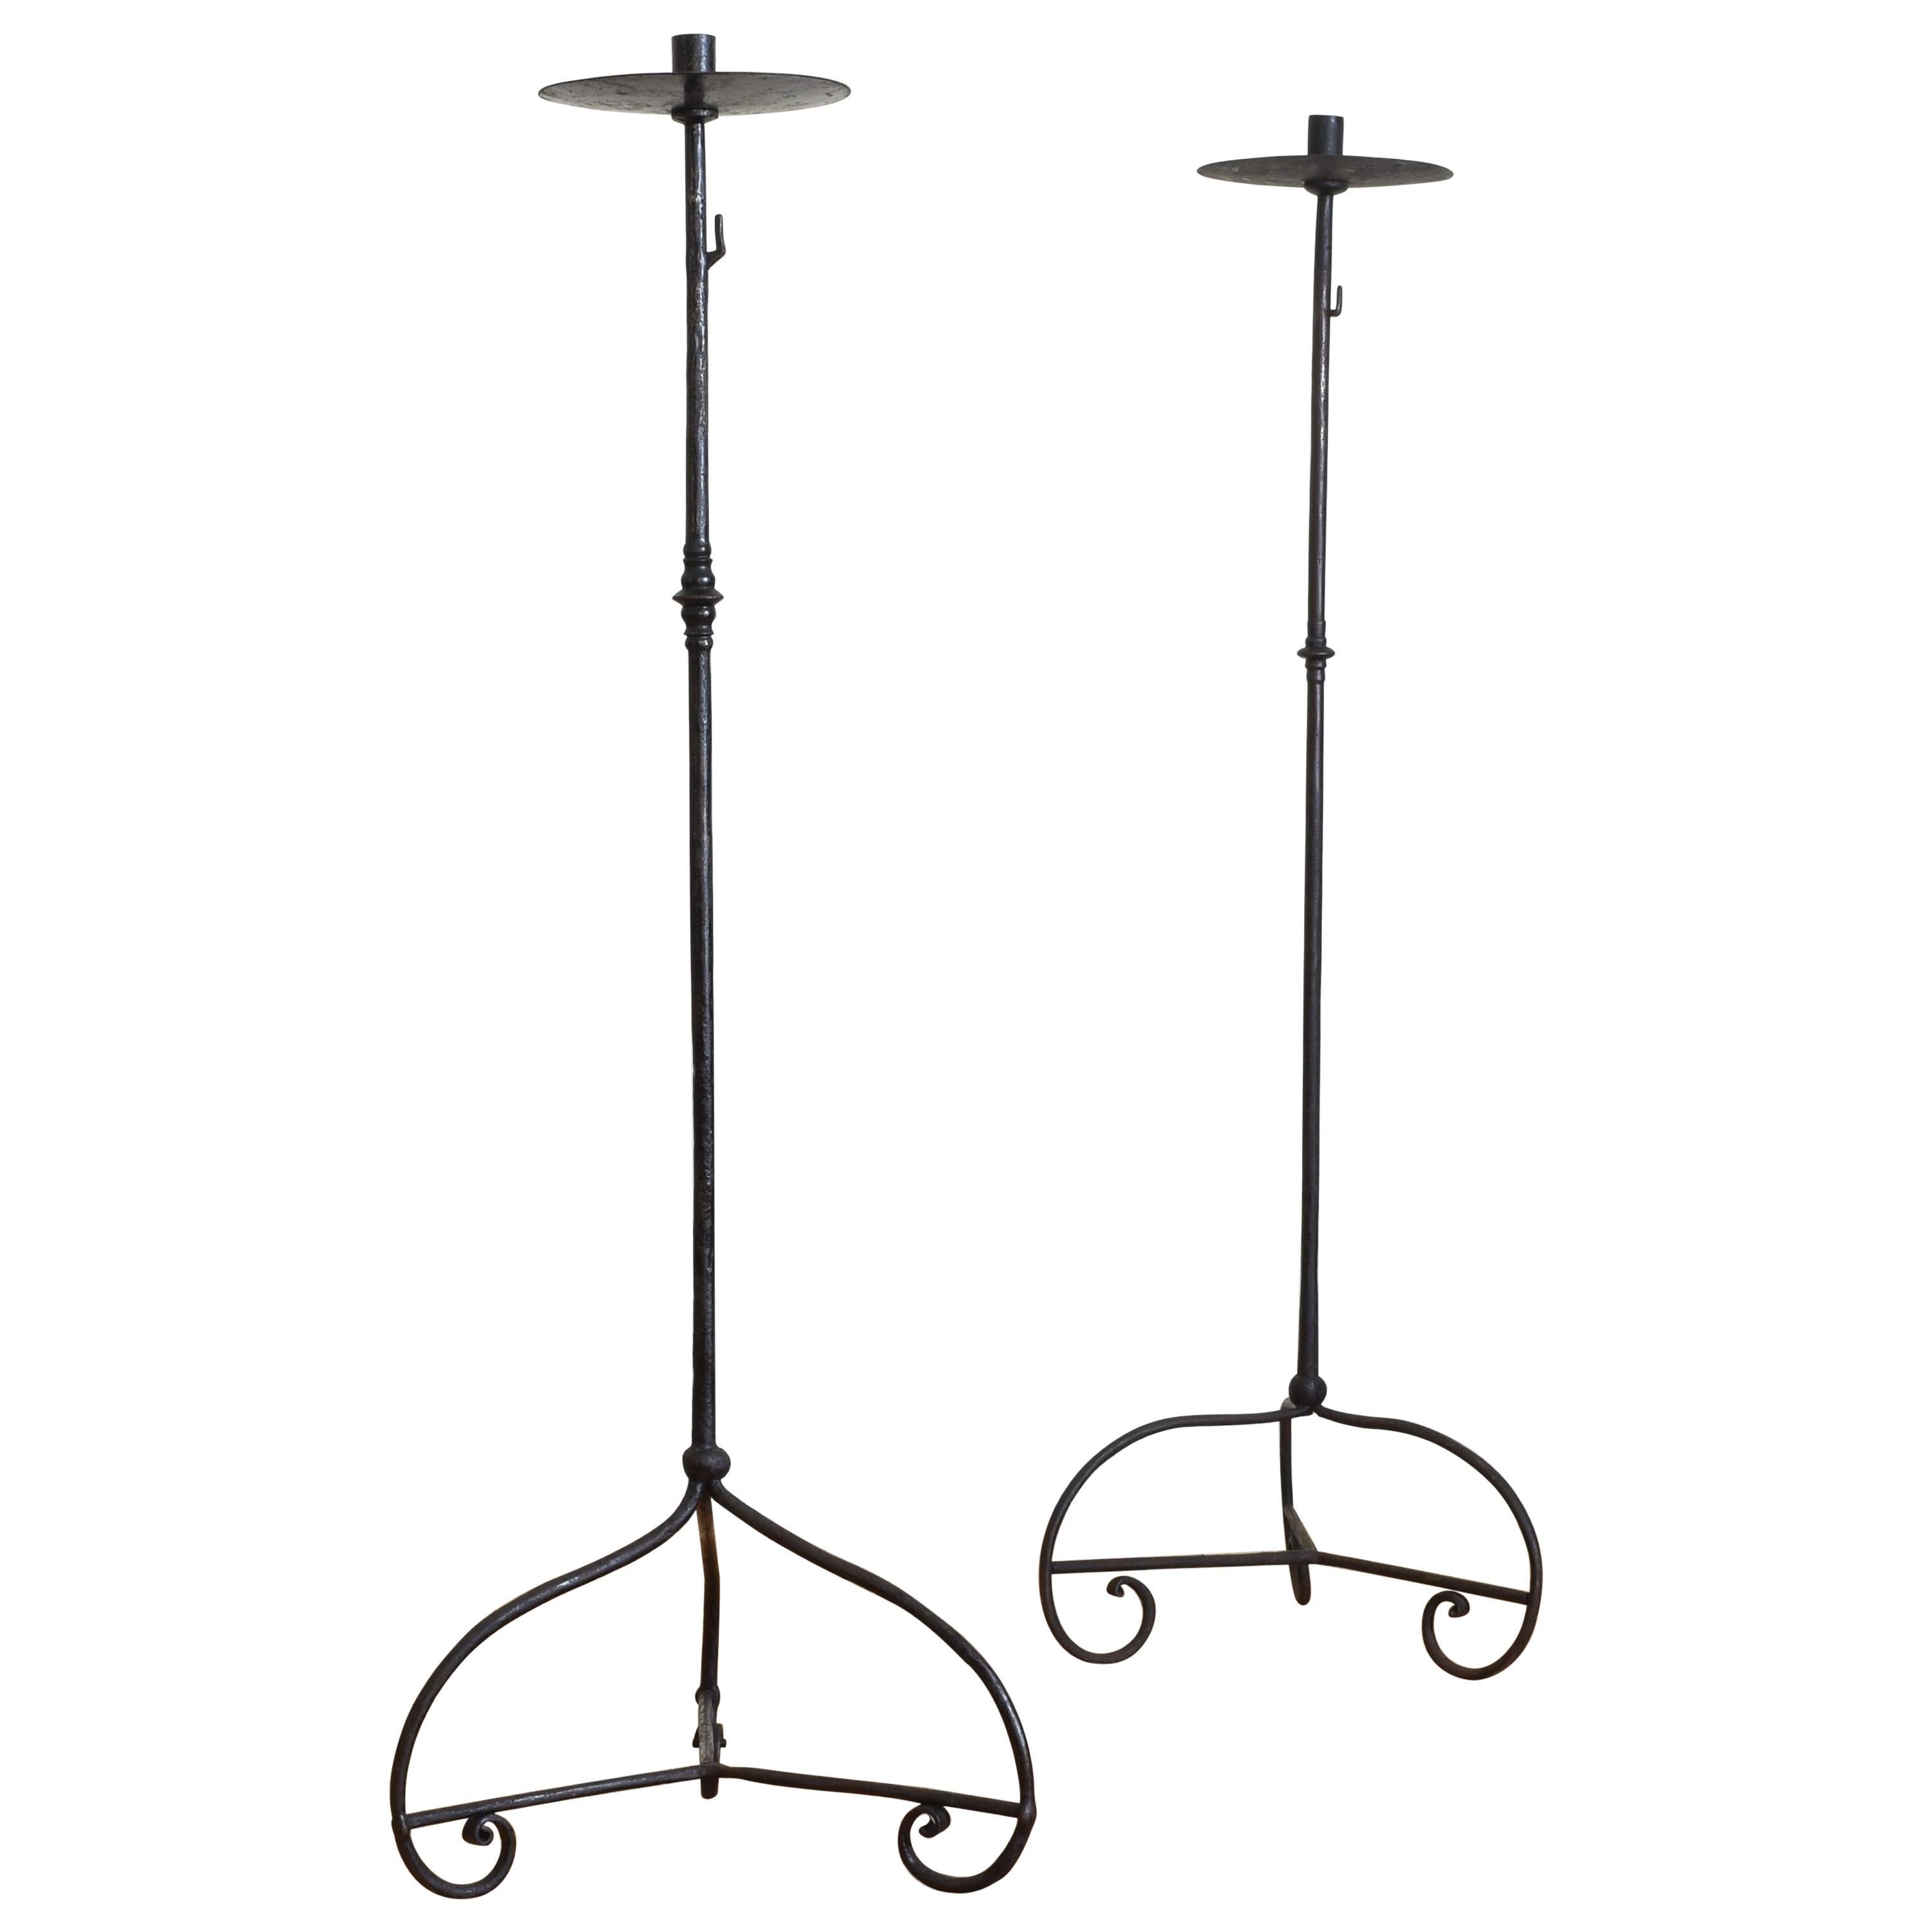 Pair of French Wrought Iron Baroque Revival Torcheres